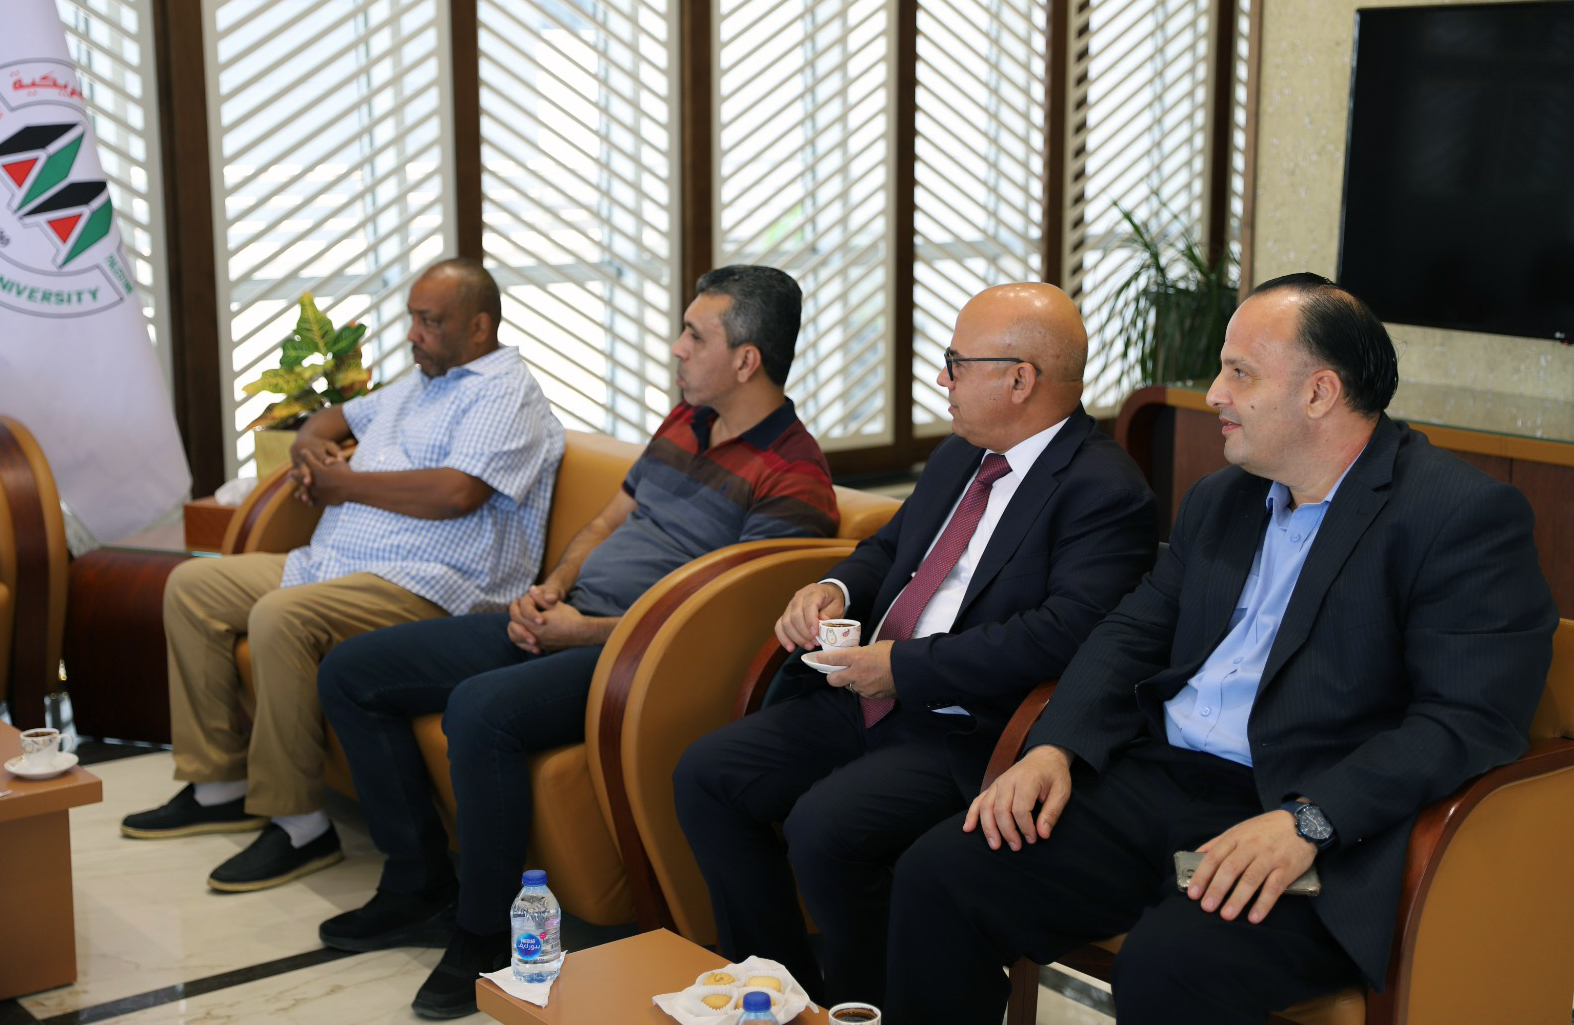 A Jerusalemite Delegation Visits AAUP in Ramallah